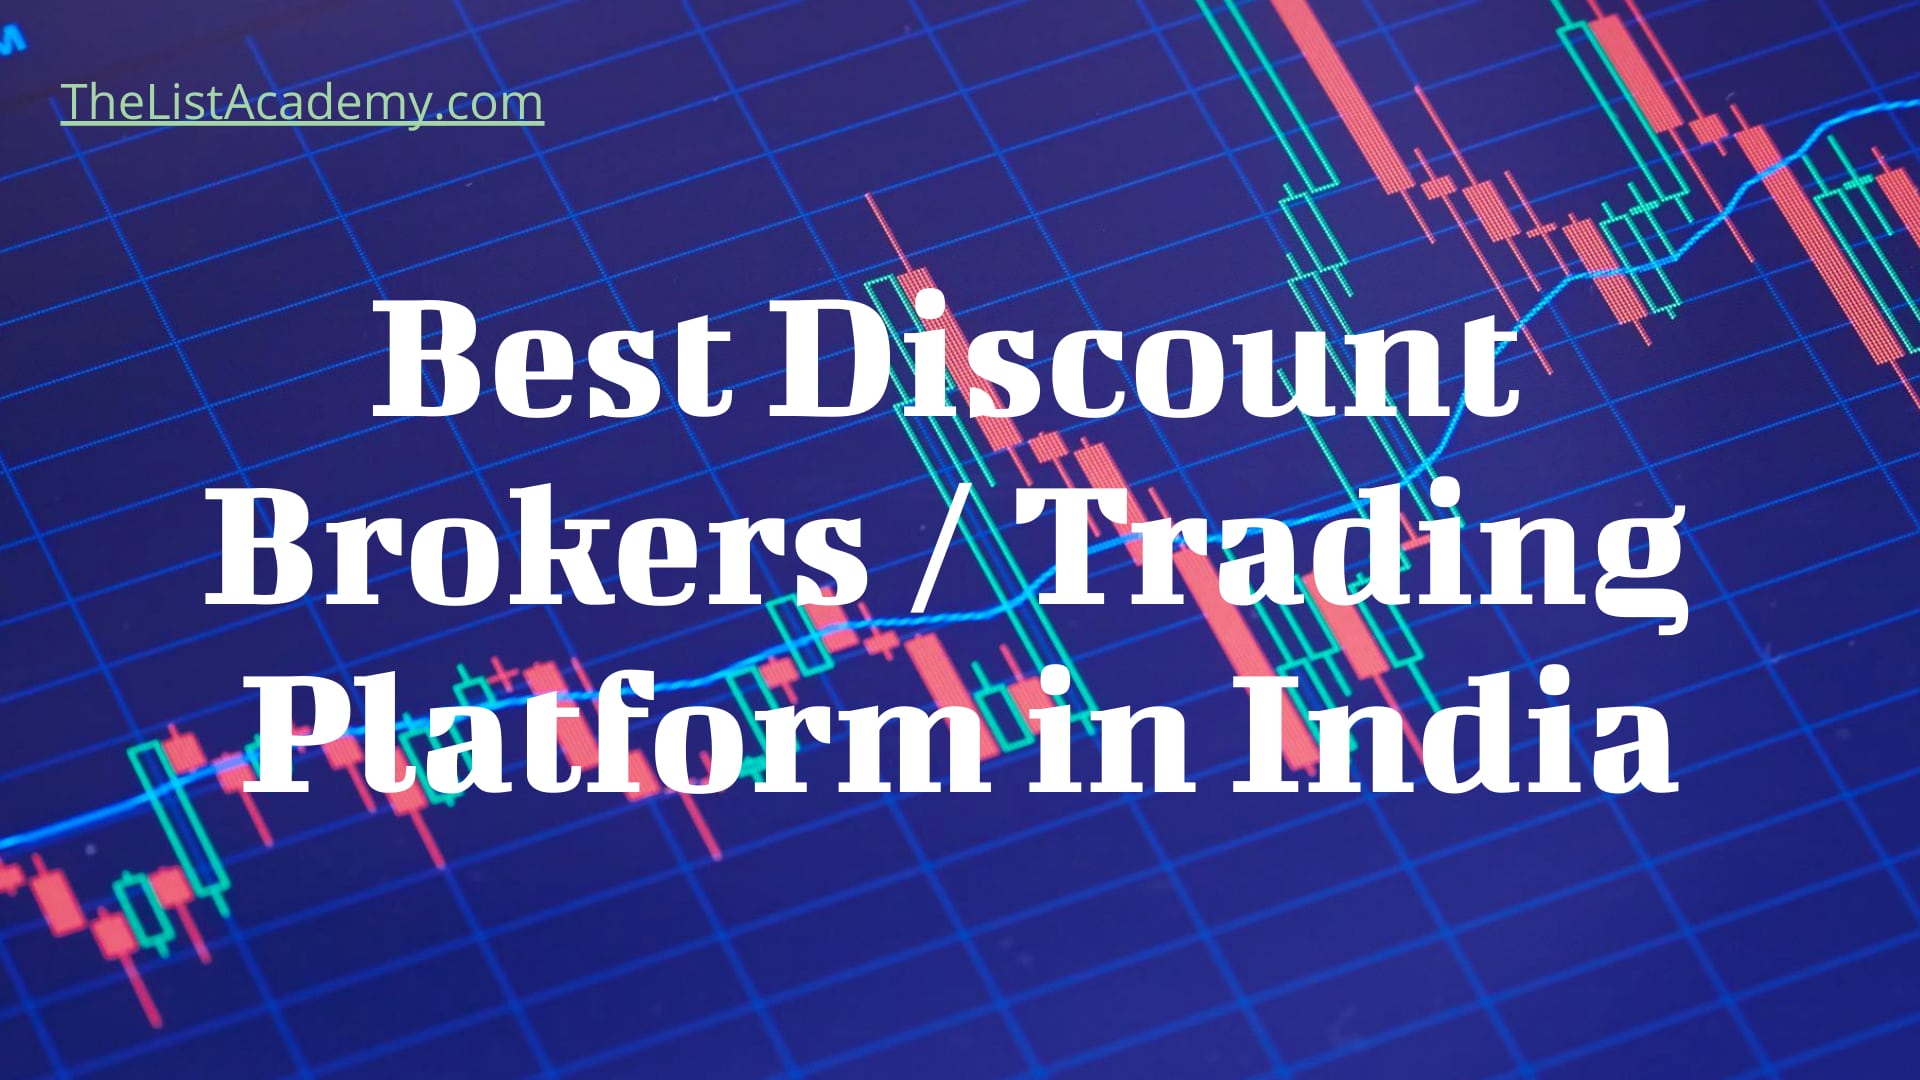 Cover Image For List : 13 Best Discount Brokers / Trading Platform In India